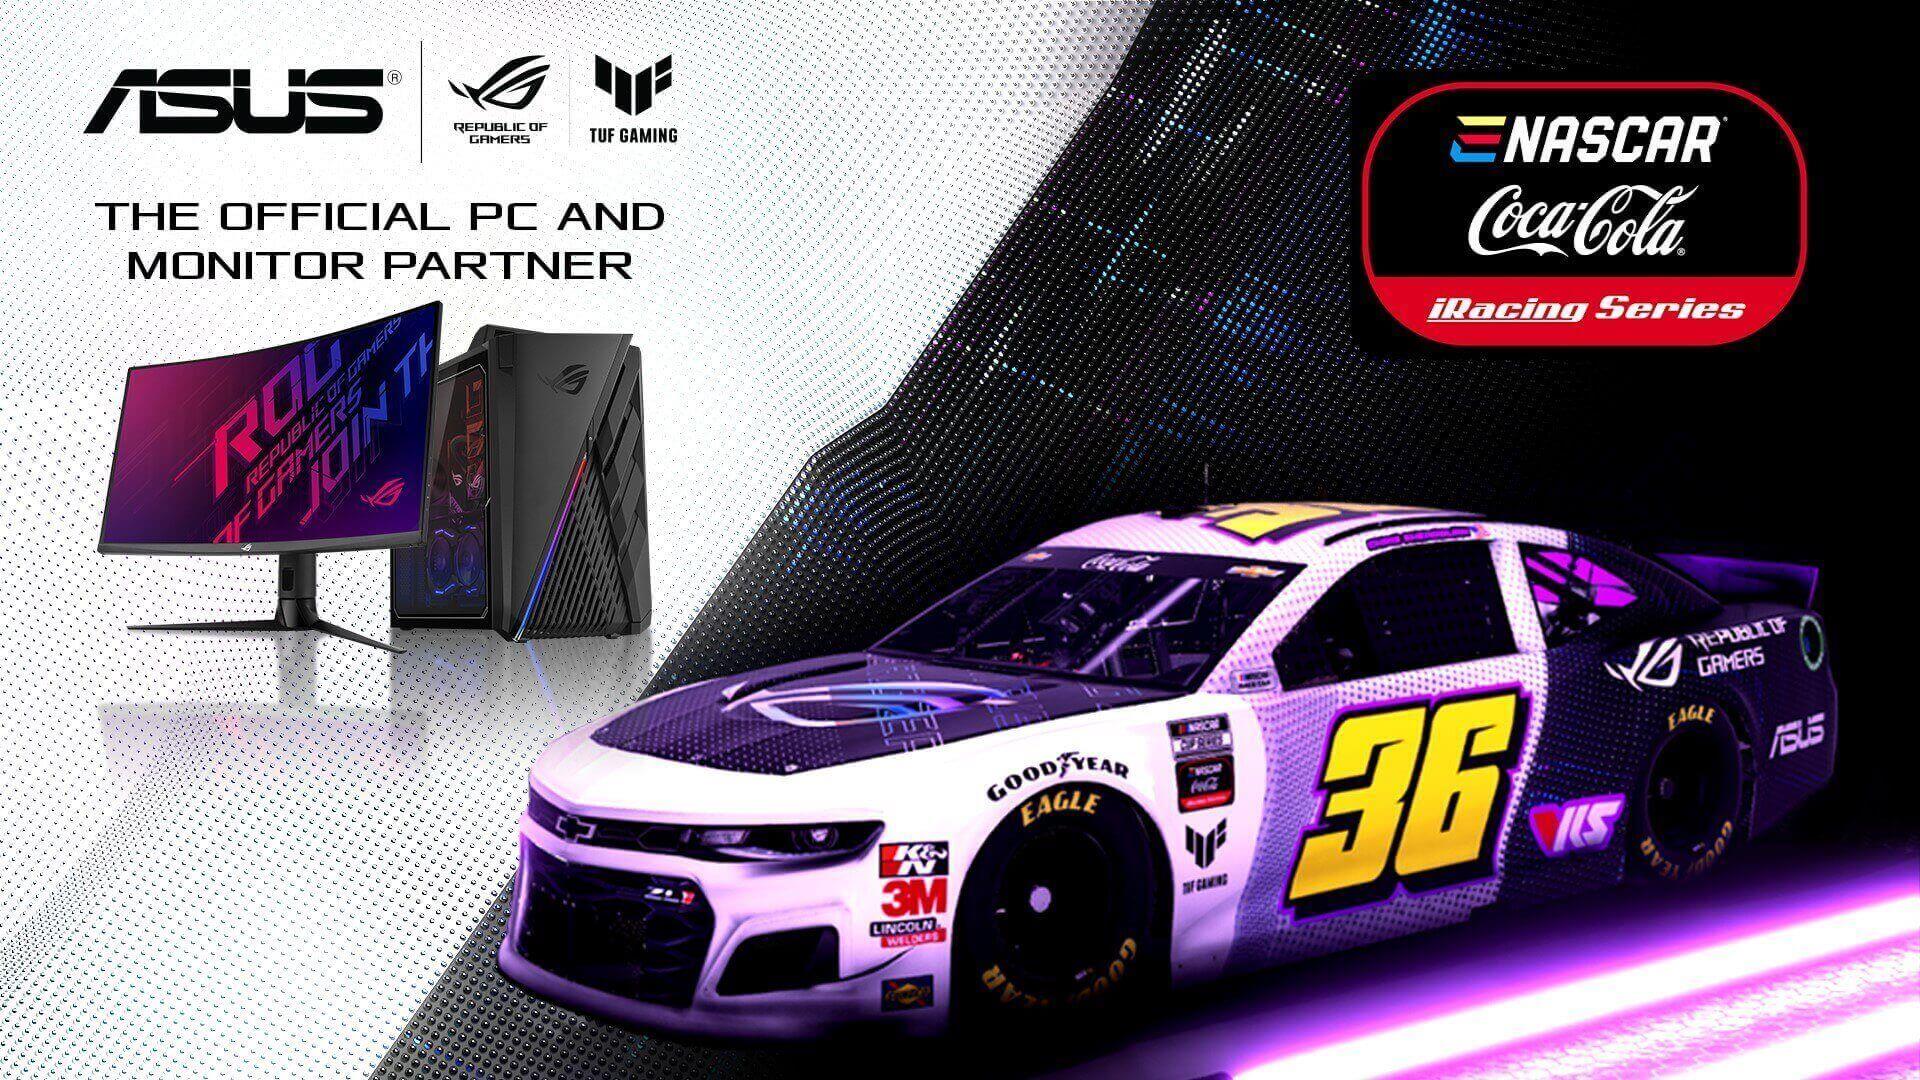 iRacing series Nascar with ROG PC and monitor - ASUS the official PC and Monitor Partner